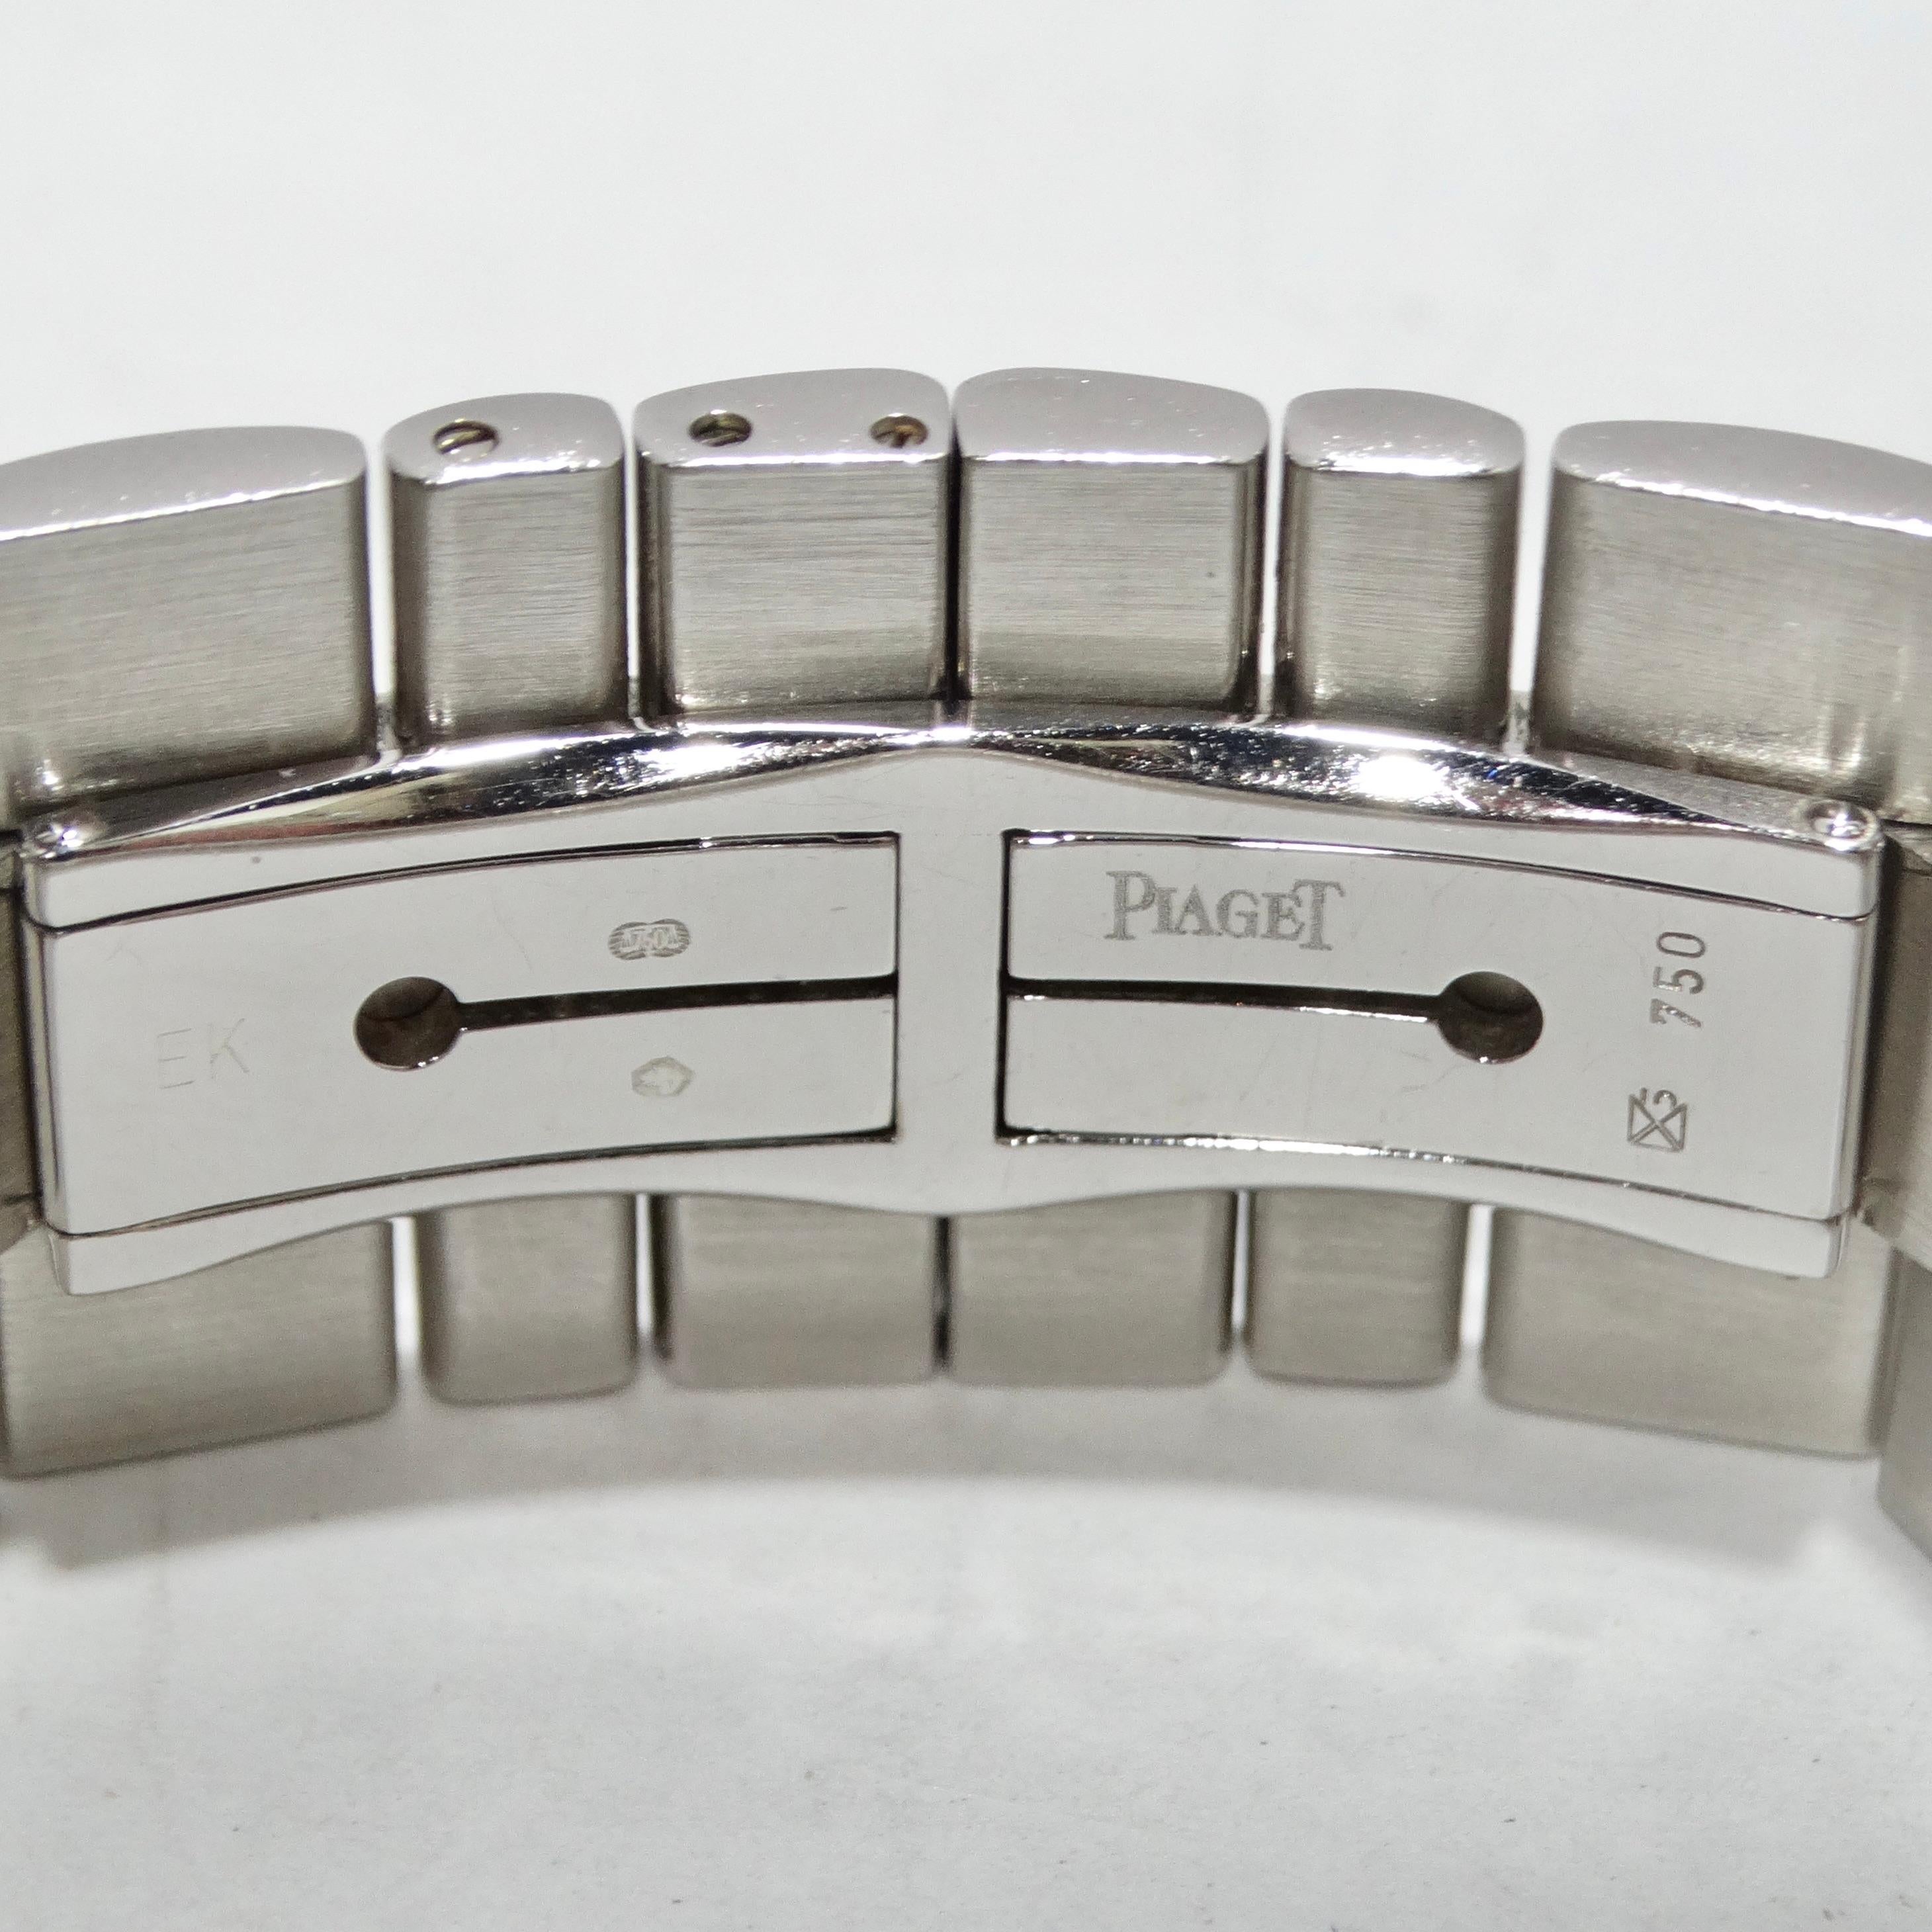 Piaget Square Dancer with Diamond Bezel 18K Solid White Gold Watch In Good Condition For Sale In Scottsdale, AZ